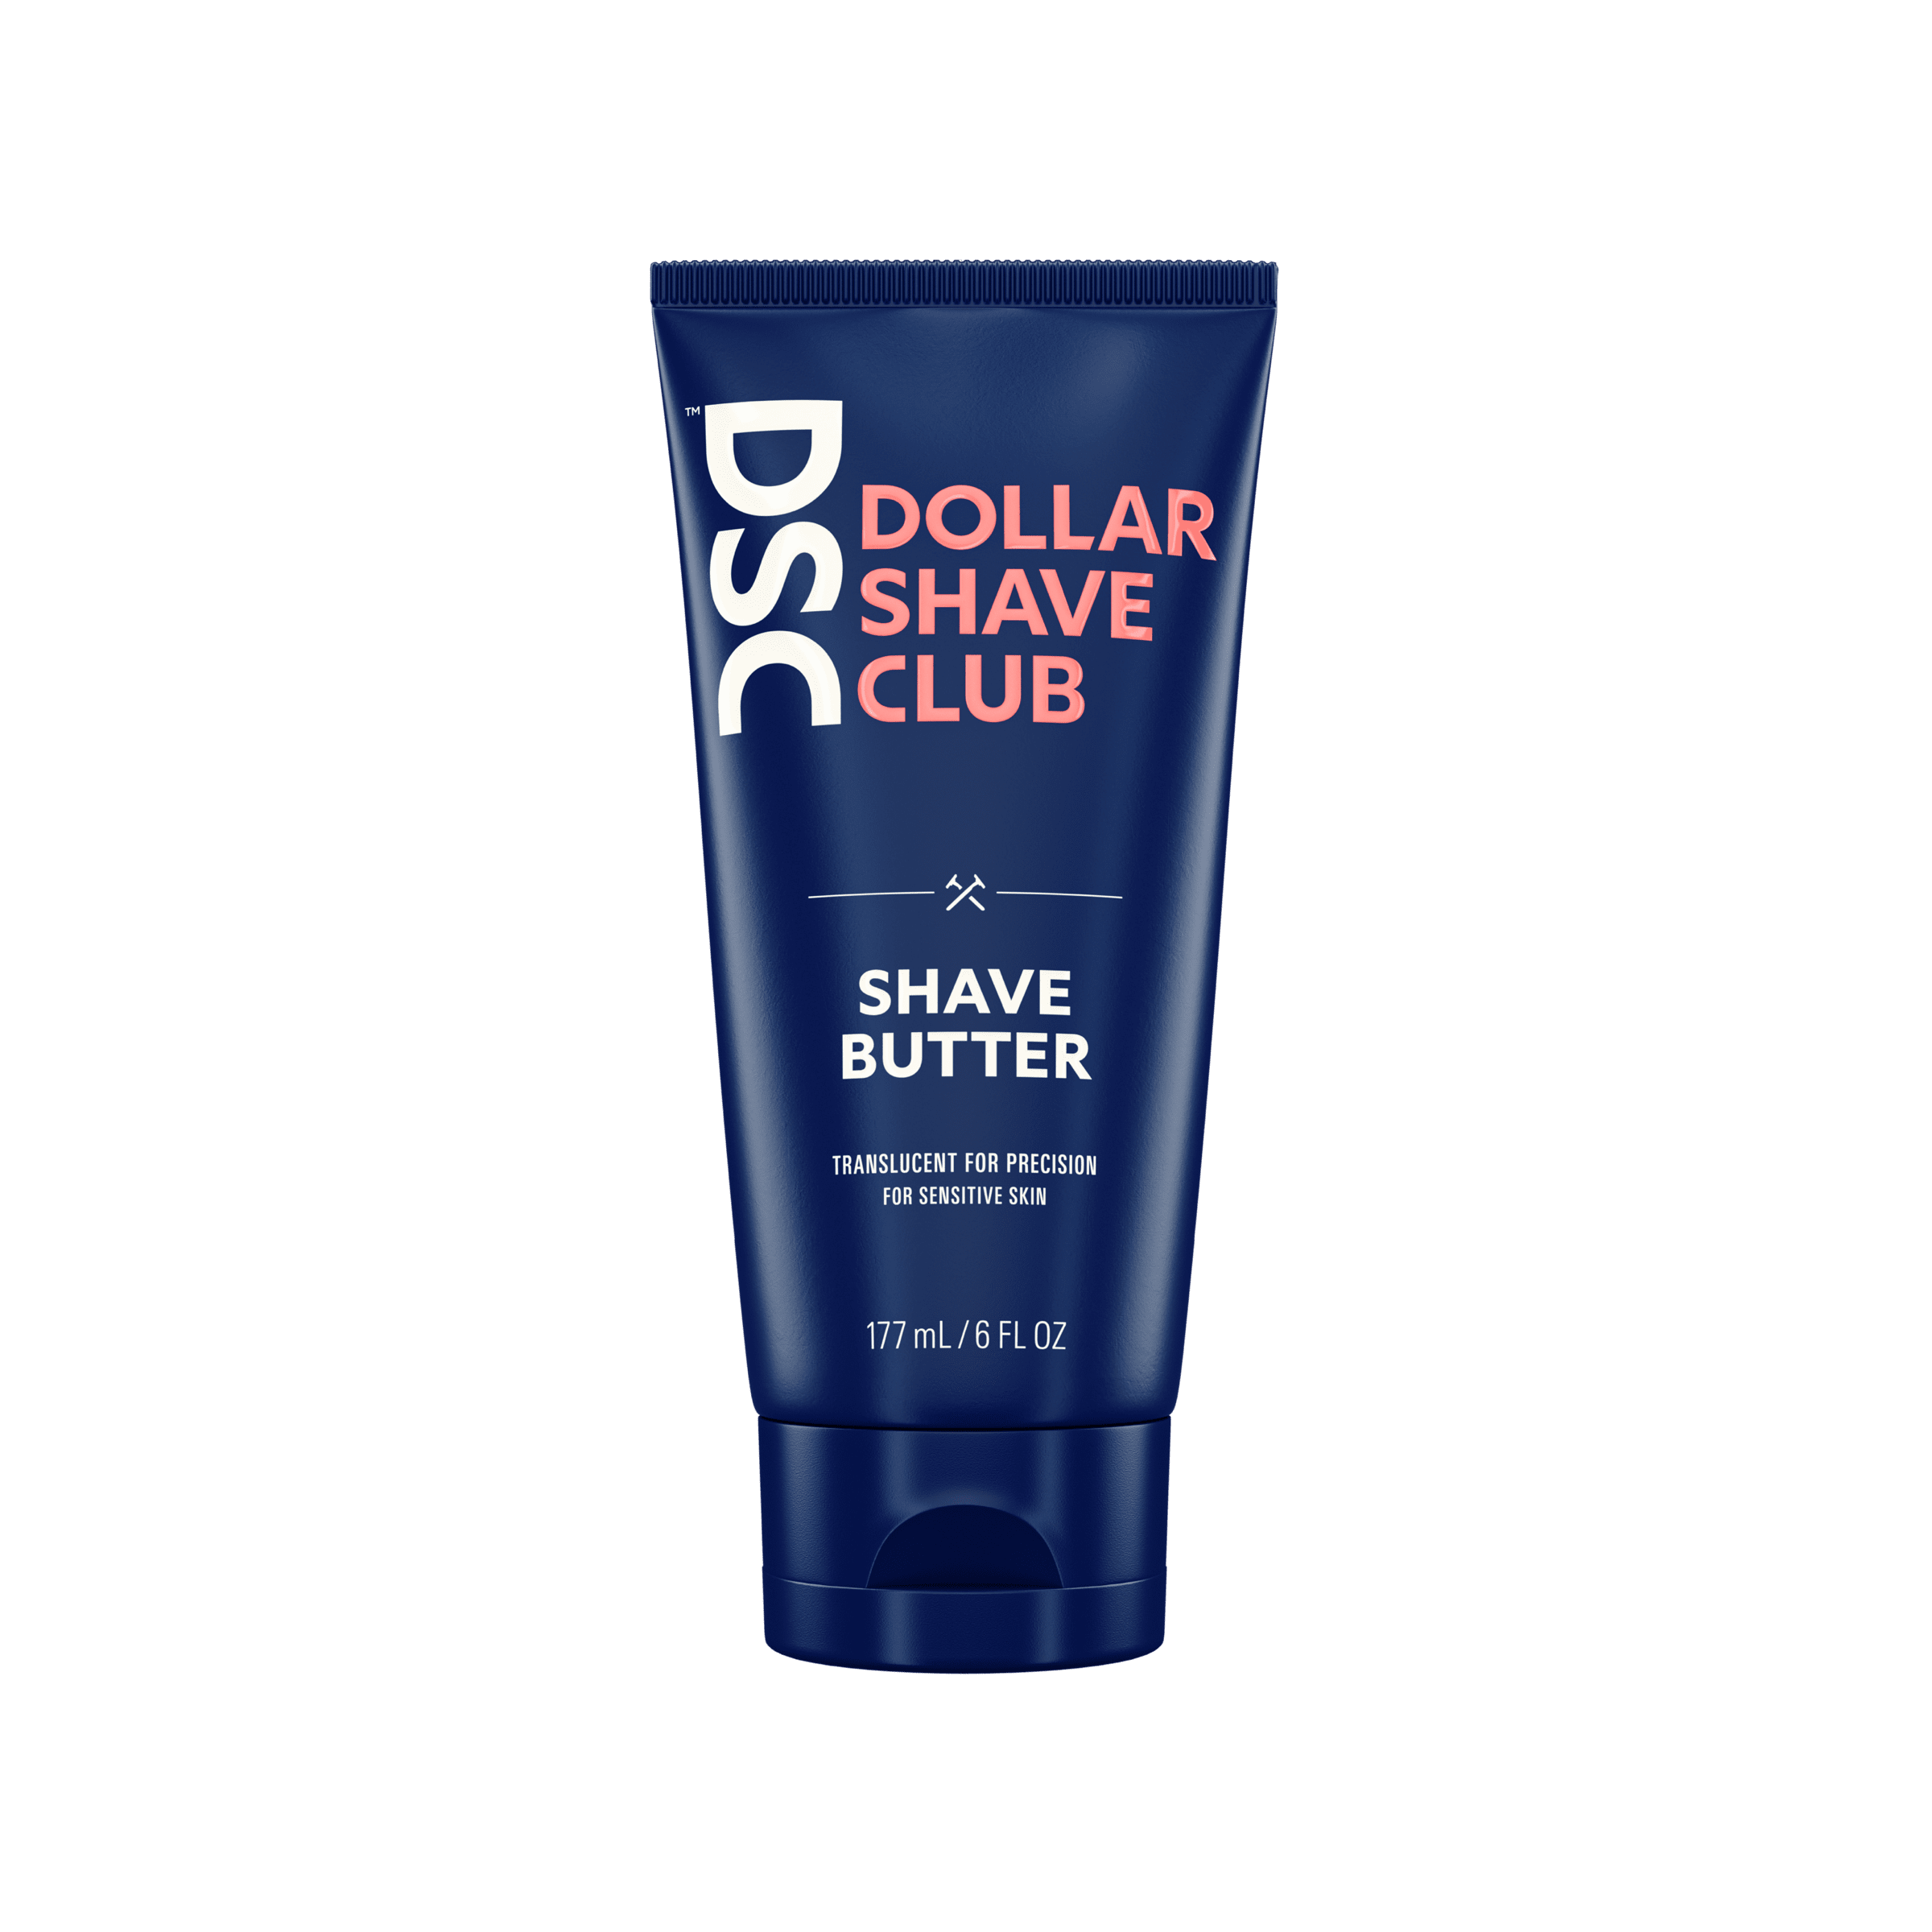 Dollar Shave Club Shave Butter product image against blank backdrop.